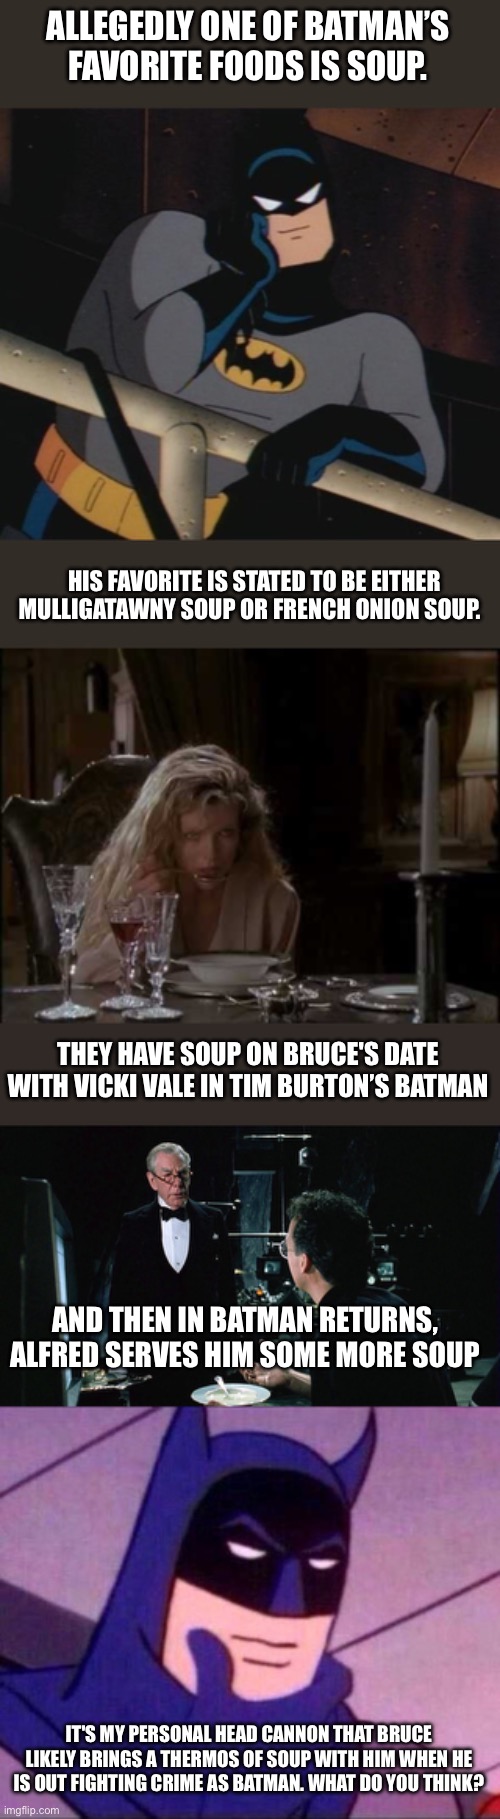 Batman loves soup | ALLEGEDLY ONE OF BATMAN’S FAVORITE FOODS IS SOUP. HIS FAVORITE IS STATED TO BE EITHER MULLIGATAWNY SOUP OR FRENCH ONION SOUP. THEY HAVE SOUP ON BRUCE'S DATE WITH VICKI VALE IN TIM BURTON’S BATMAN; AND THEN IN BATMAN RETURNS, ALFRED SERVES HIM SOME MORE SOUP; IT'S MY PERSONAL HEAD CANNON THAT BRUCE LIKELY BRINGS A THERMOS OF SOUP WITH HIM WHEN HE IS OUT FIGHTING CRIME AS BATMAN. WHAT DO YOU THINK? | image tagged in batman thinking,batman,batman returns,soup,head cannon,tim burton | made w/ Imgflip meme maker